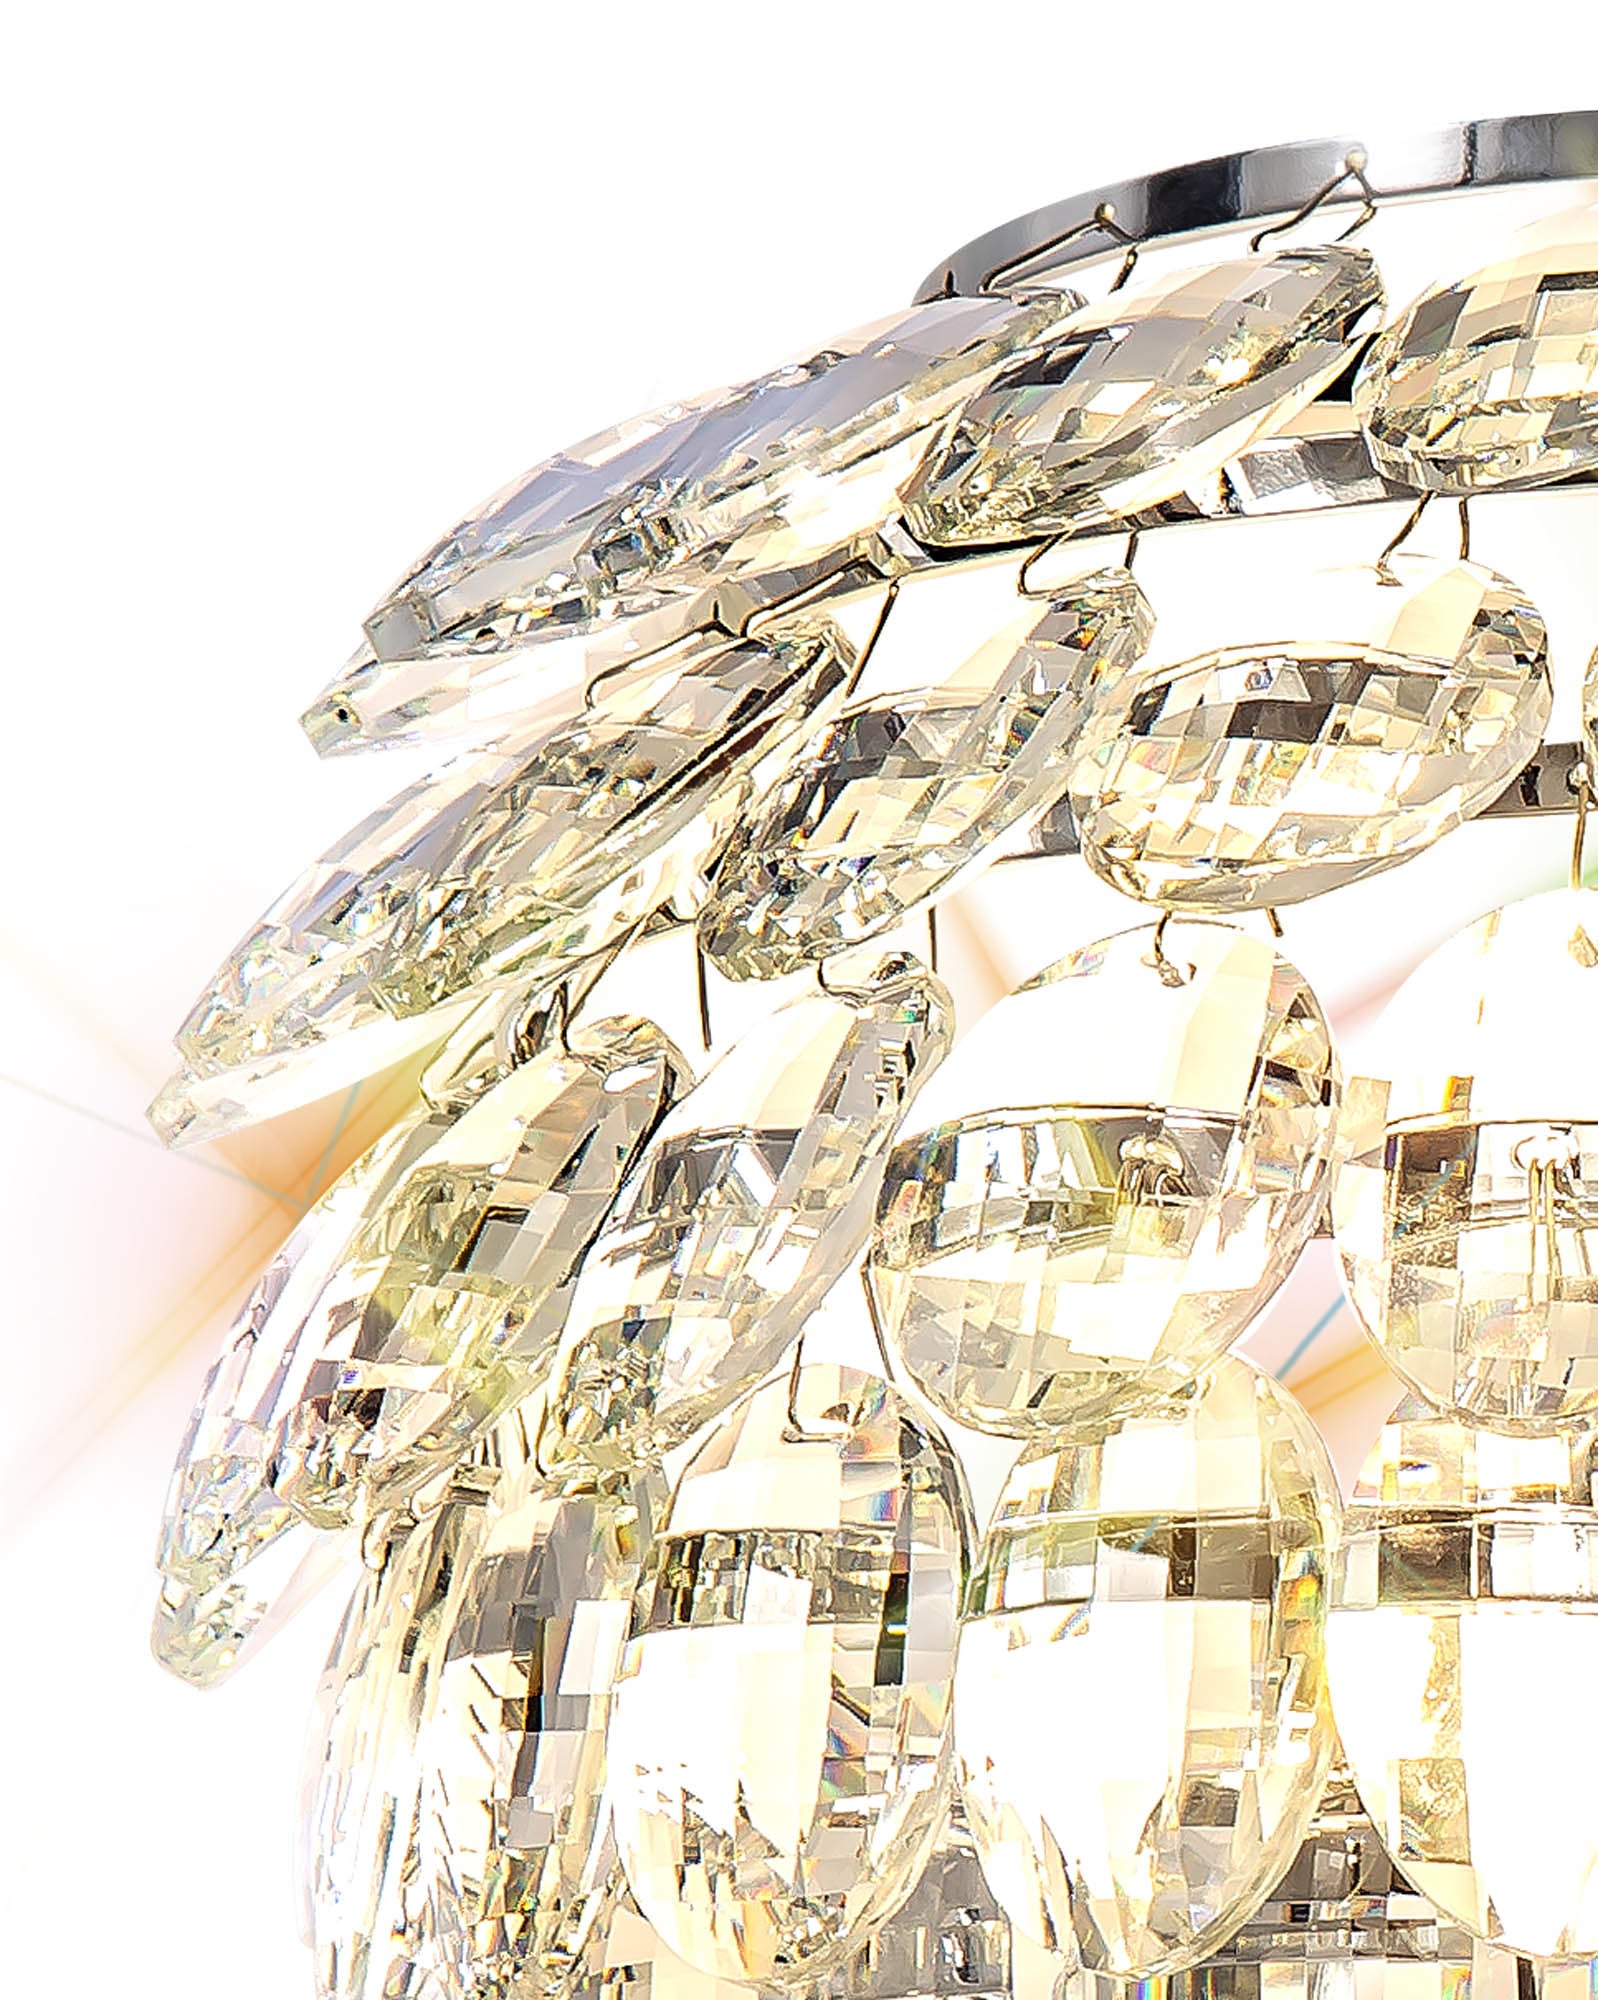 Coniston Wall Lamp, 2 Light E14, Polished Chrome/French Gold Crystal